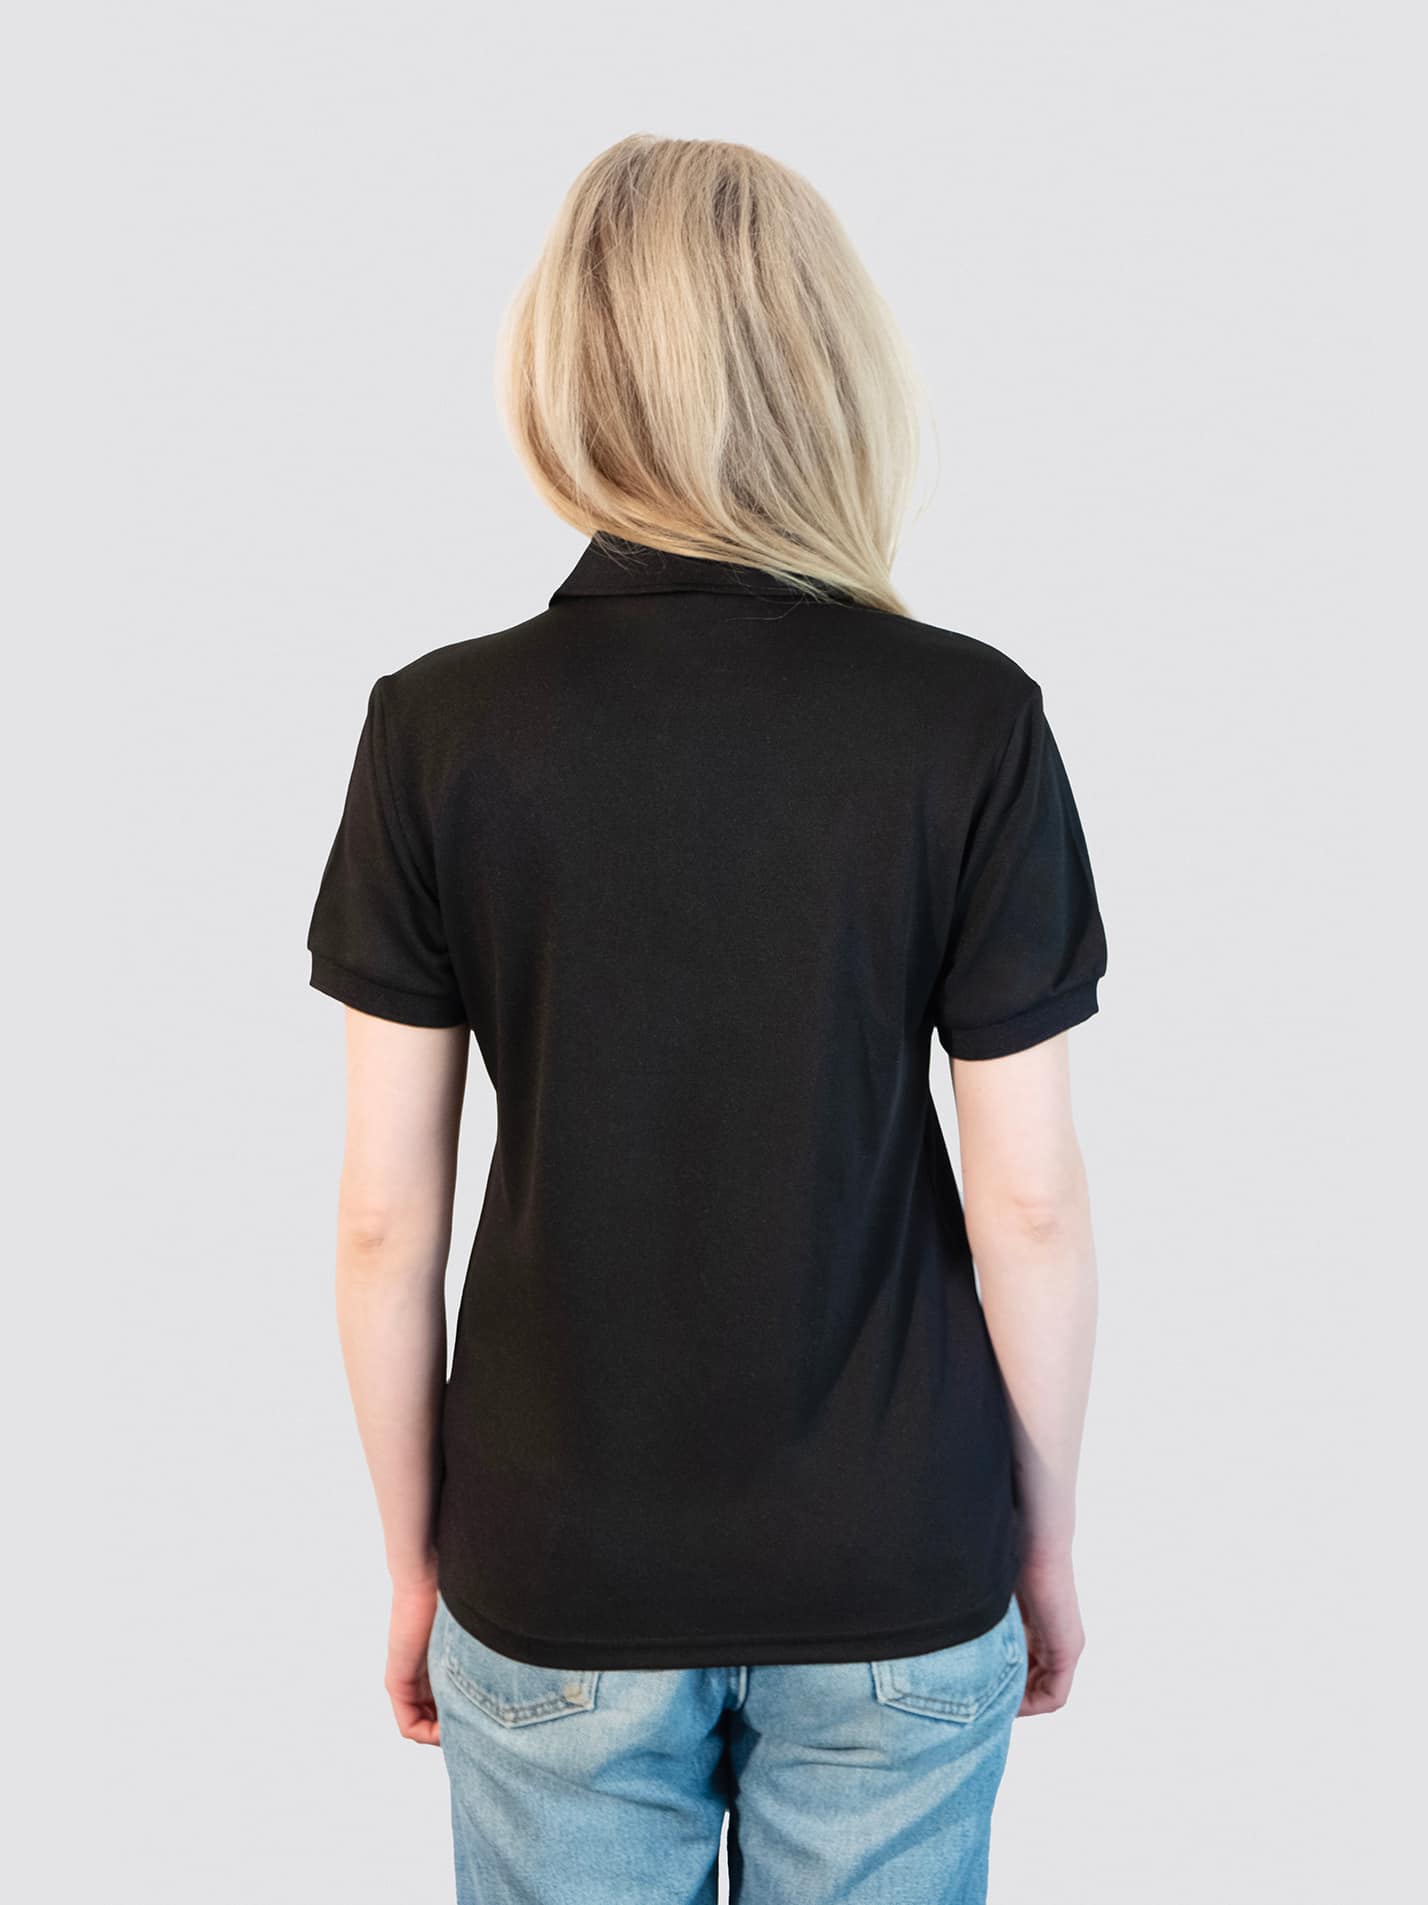 South College Durham Sustainable Ladies Polo Shirt